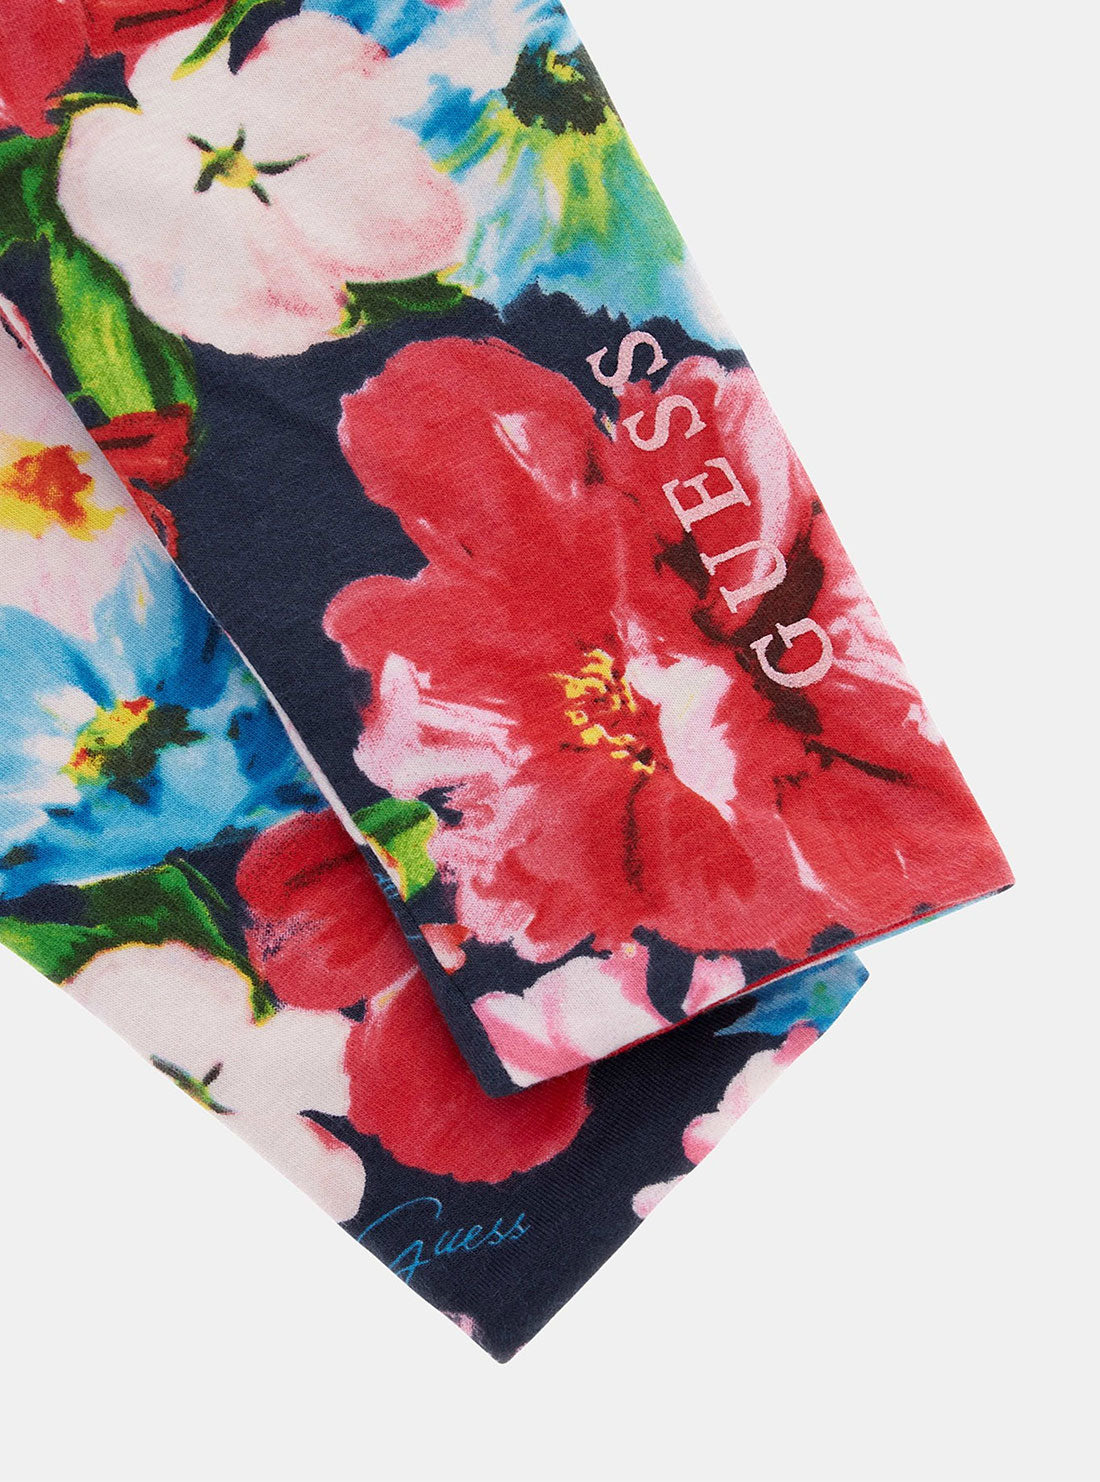 GUESS Red and Floral Reversible Leggings (2-7) detail view